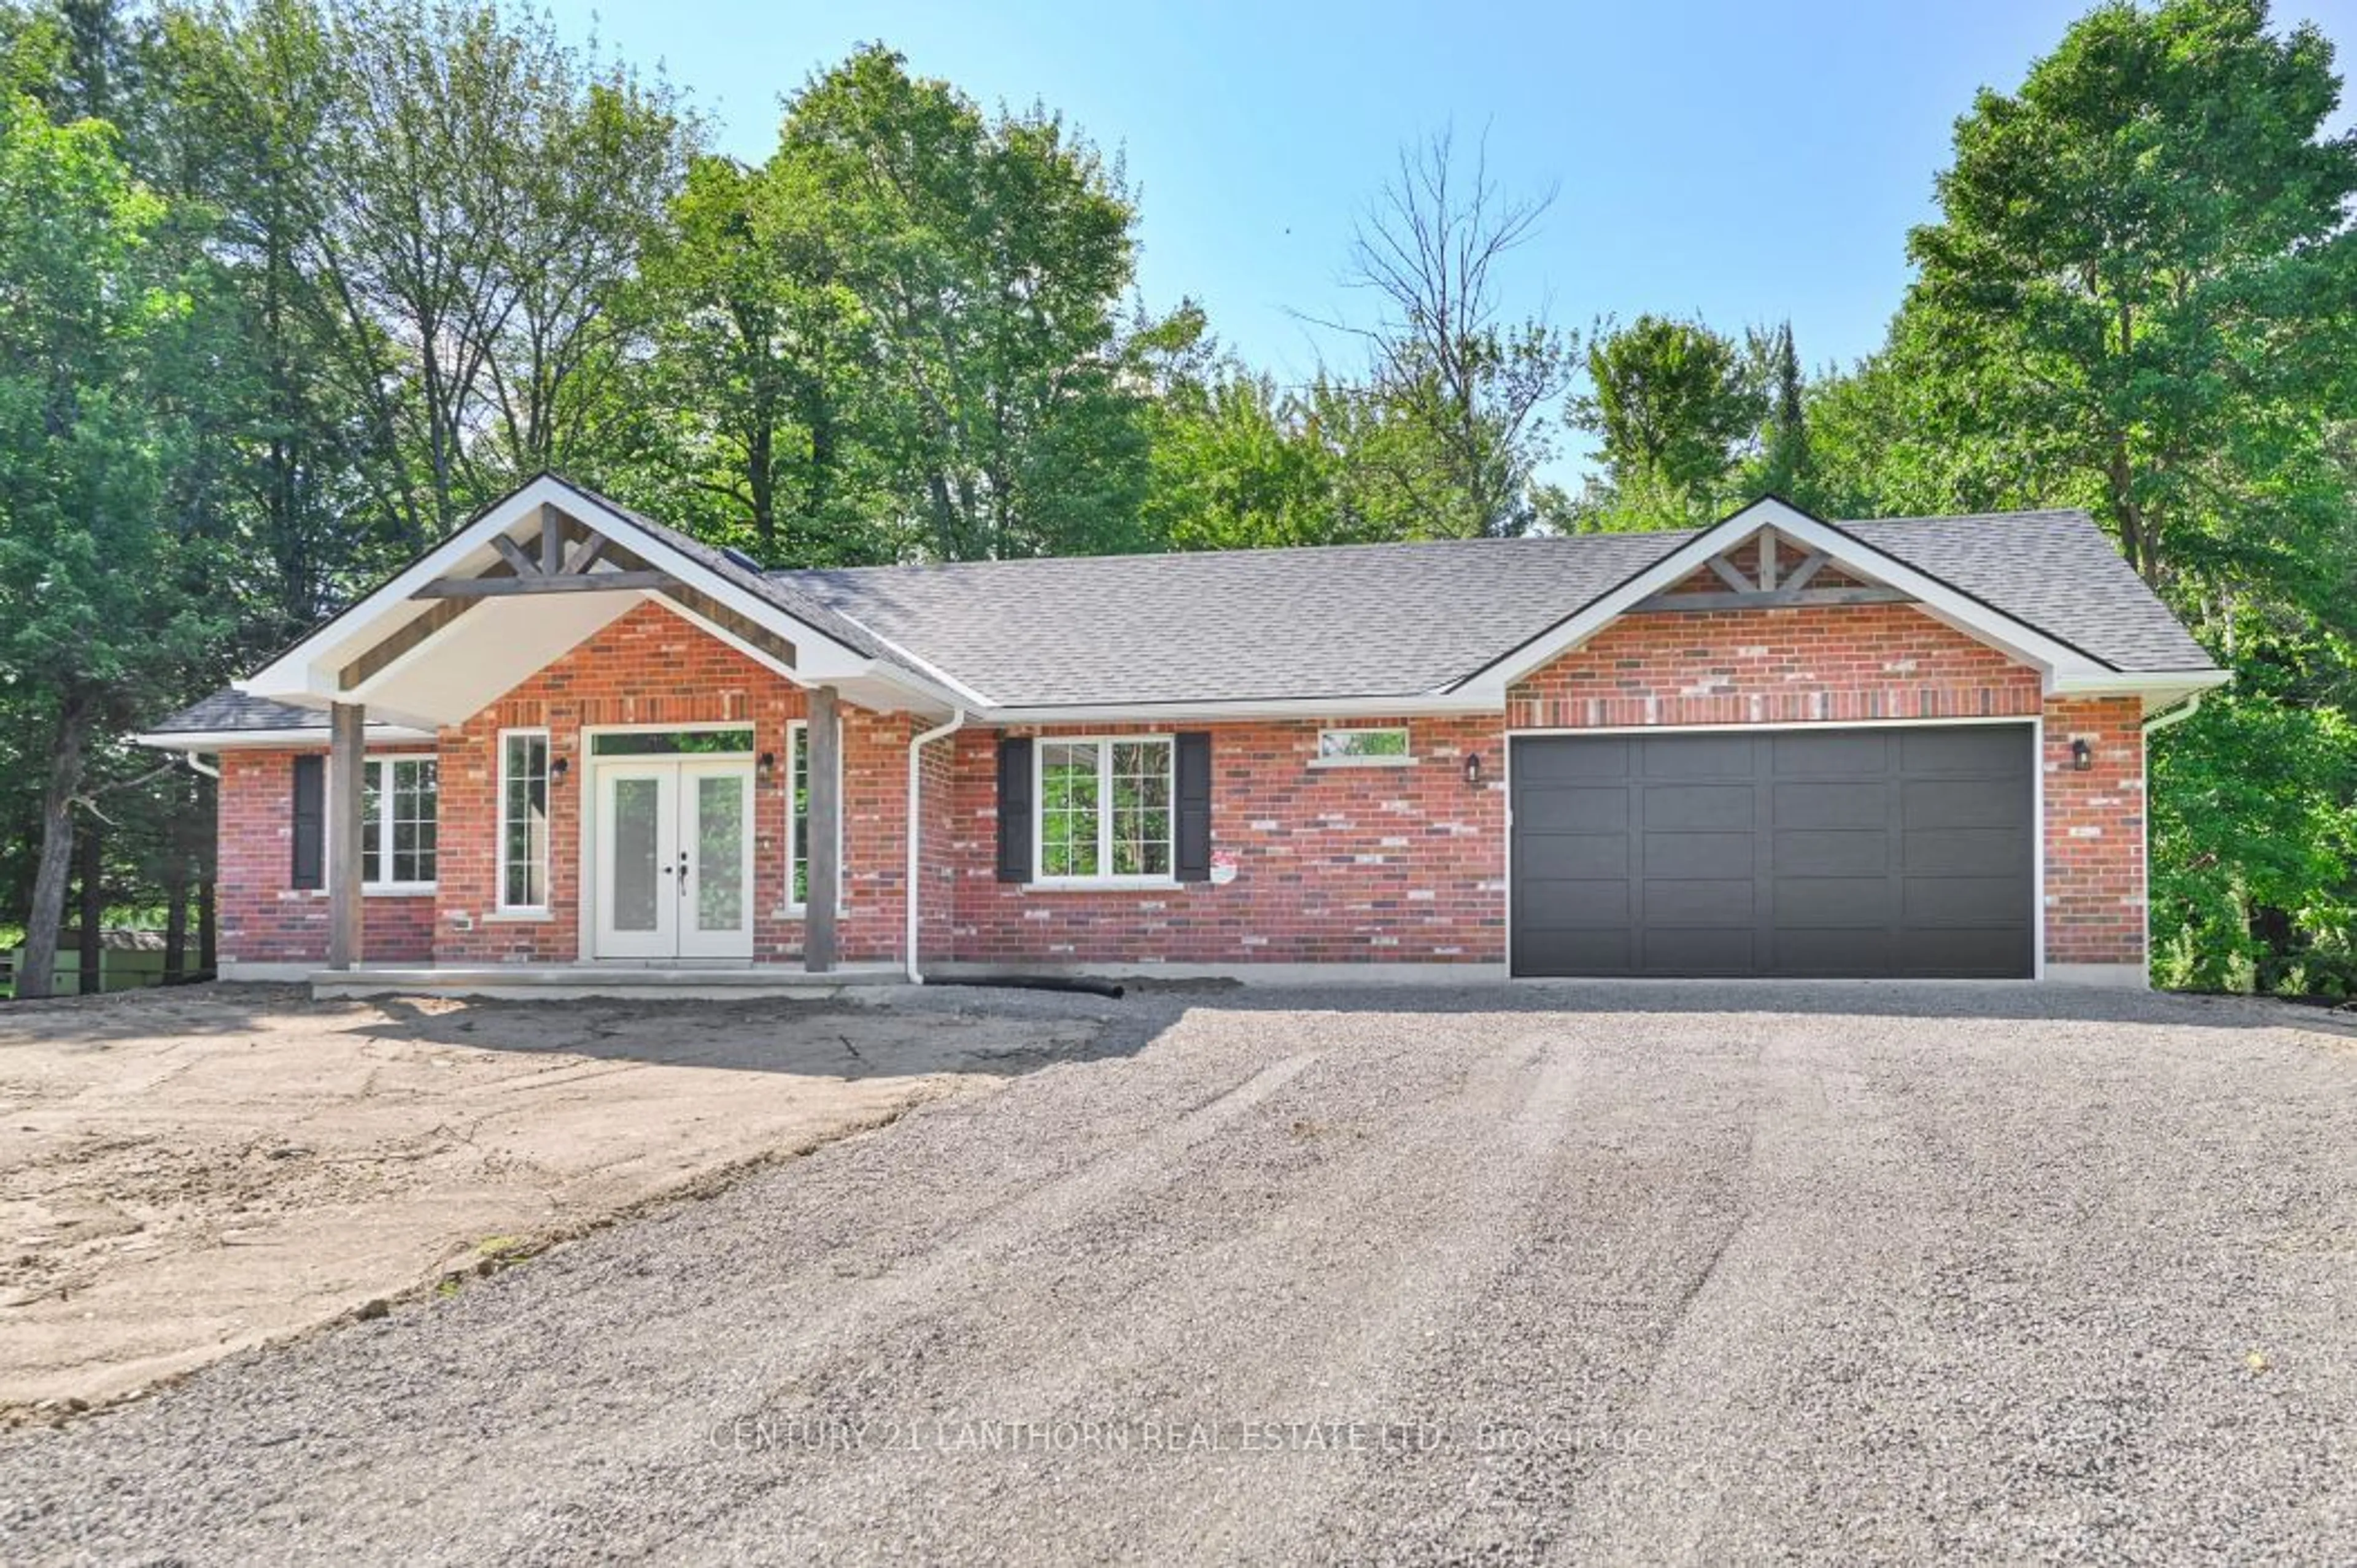 Home with brick exterior material for 1713 Hollowview Rd, Stirling-Rawdon Ontario K0K 3E0